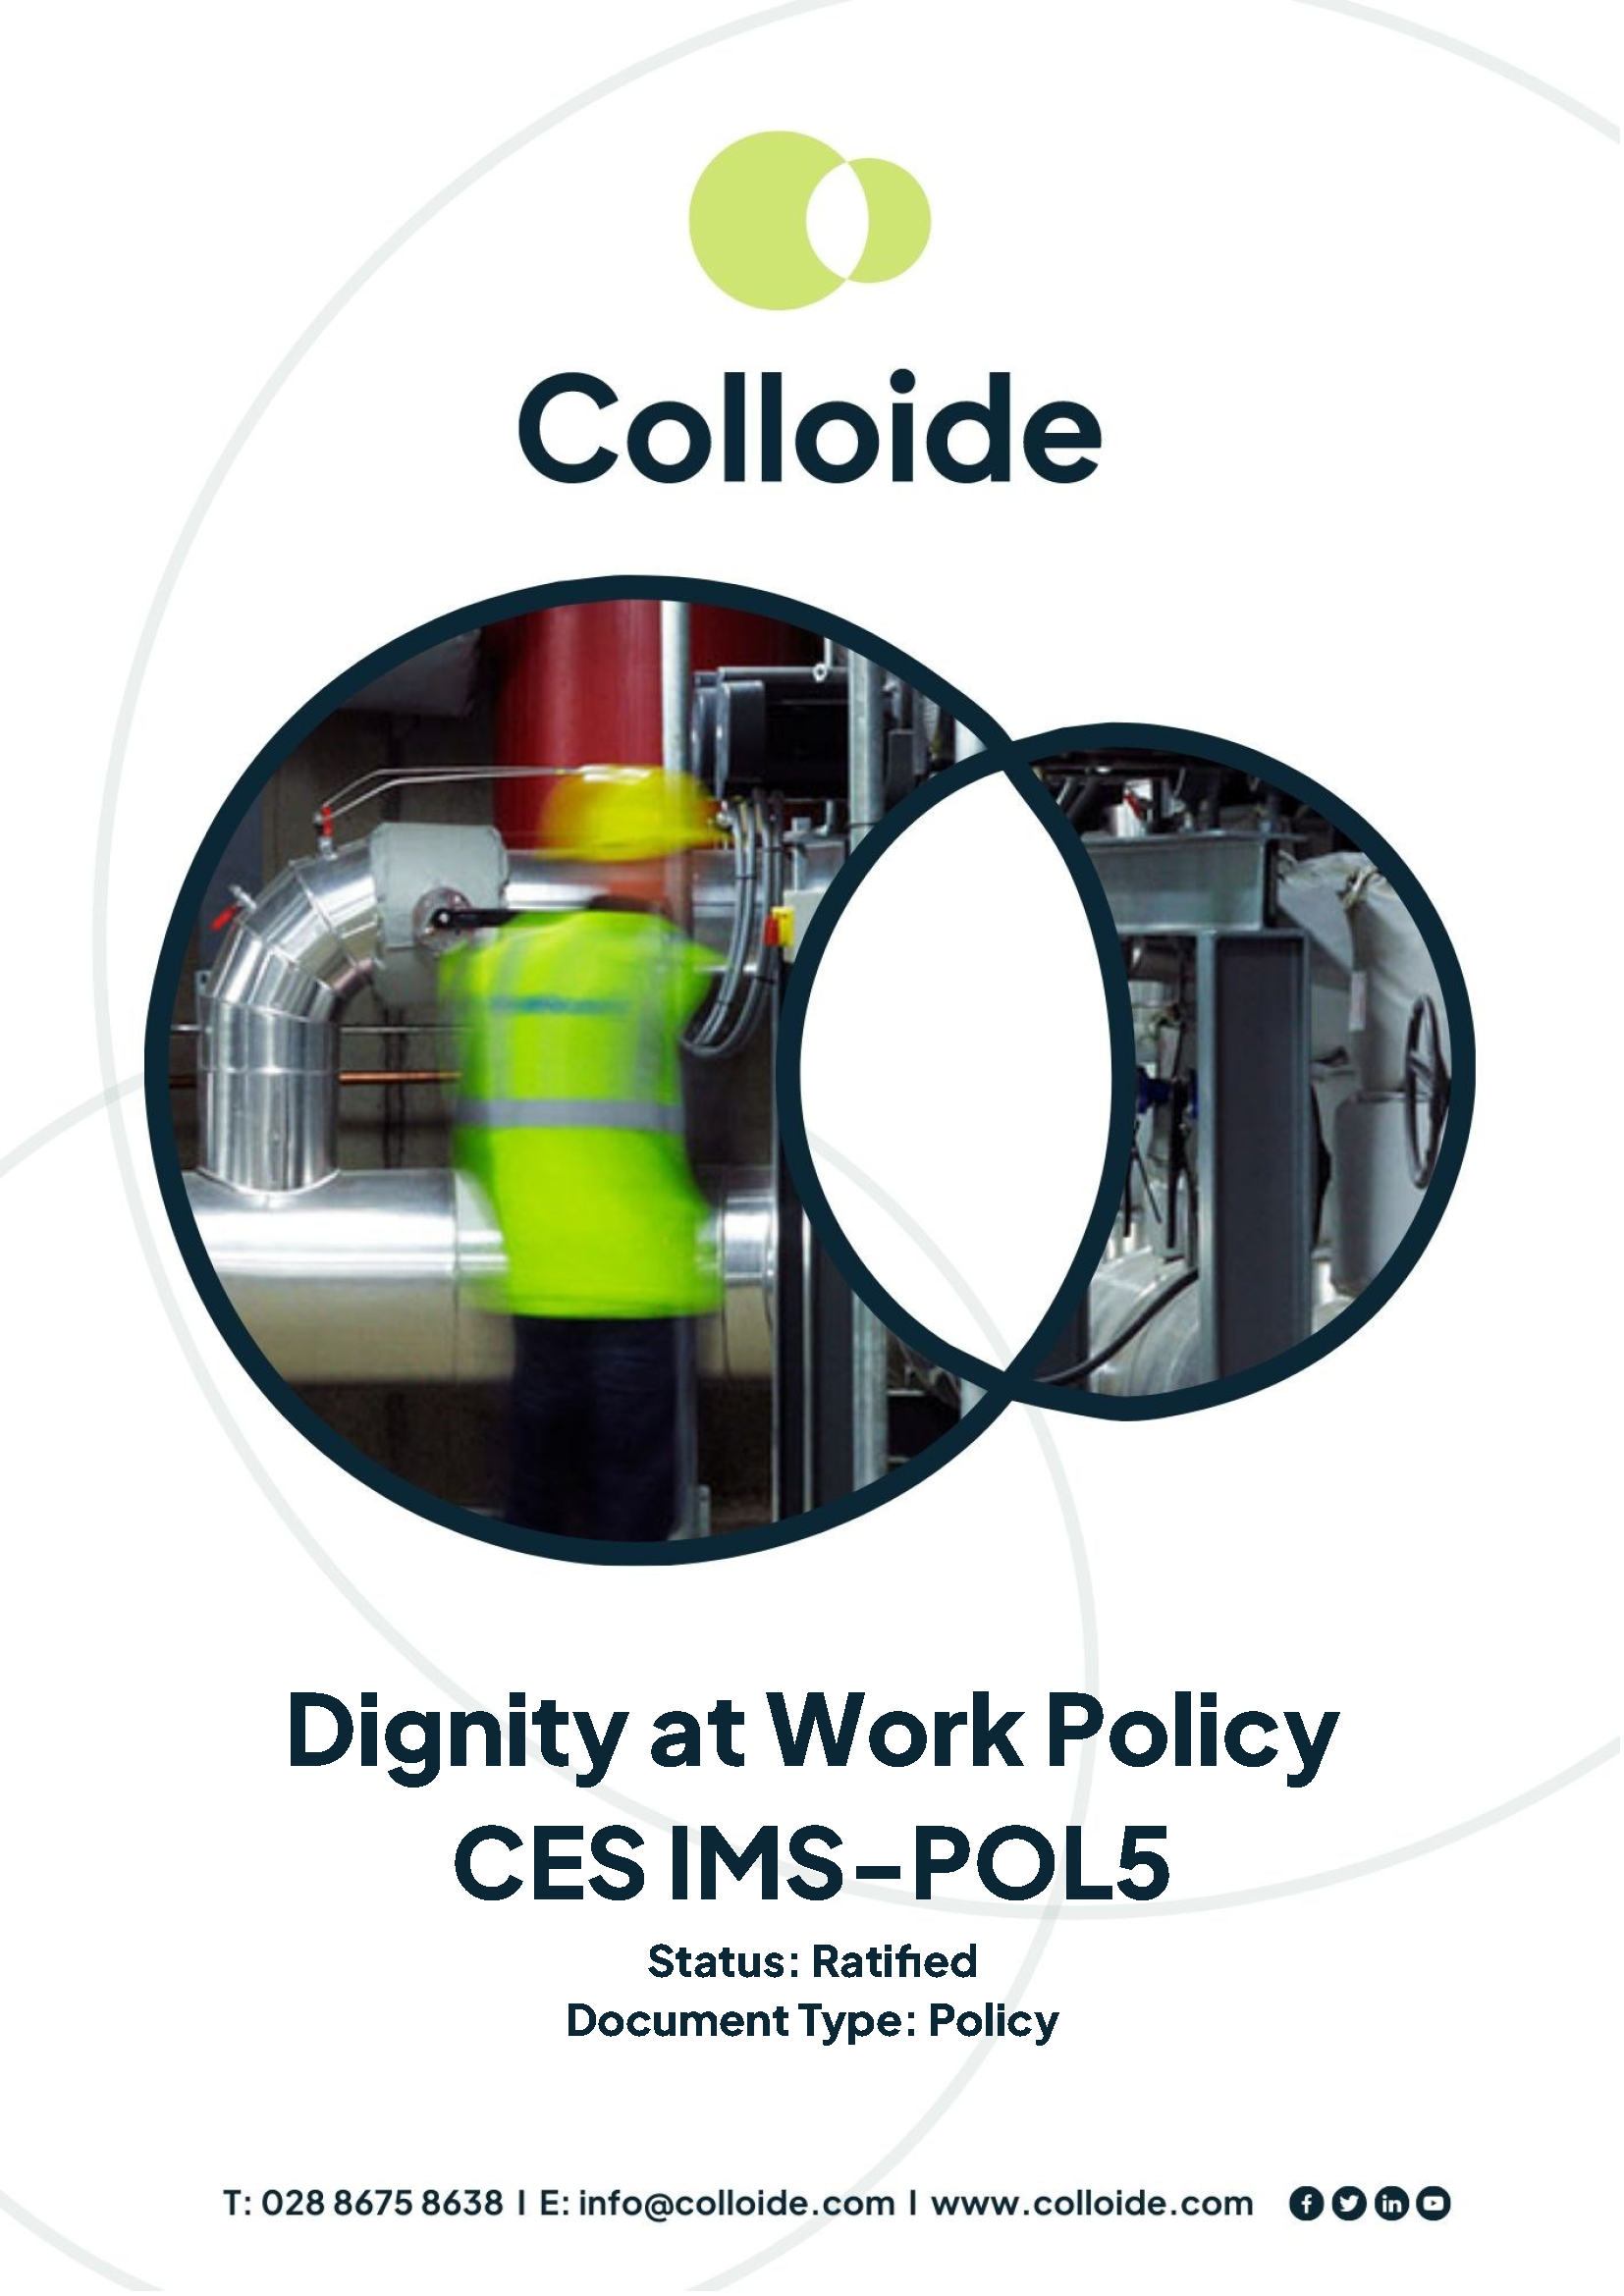 Cover Image for CES IMS-POL5 – Dignity at Work Policy